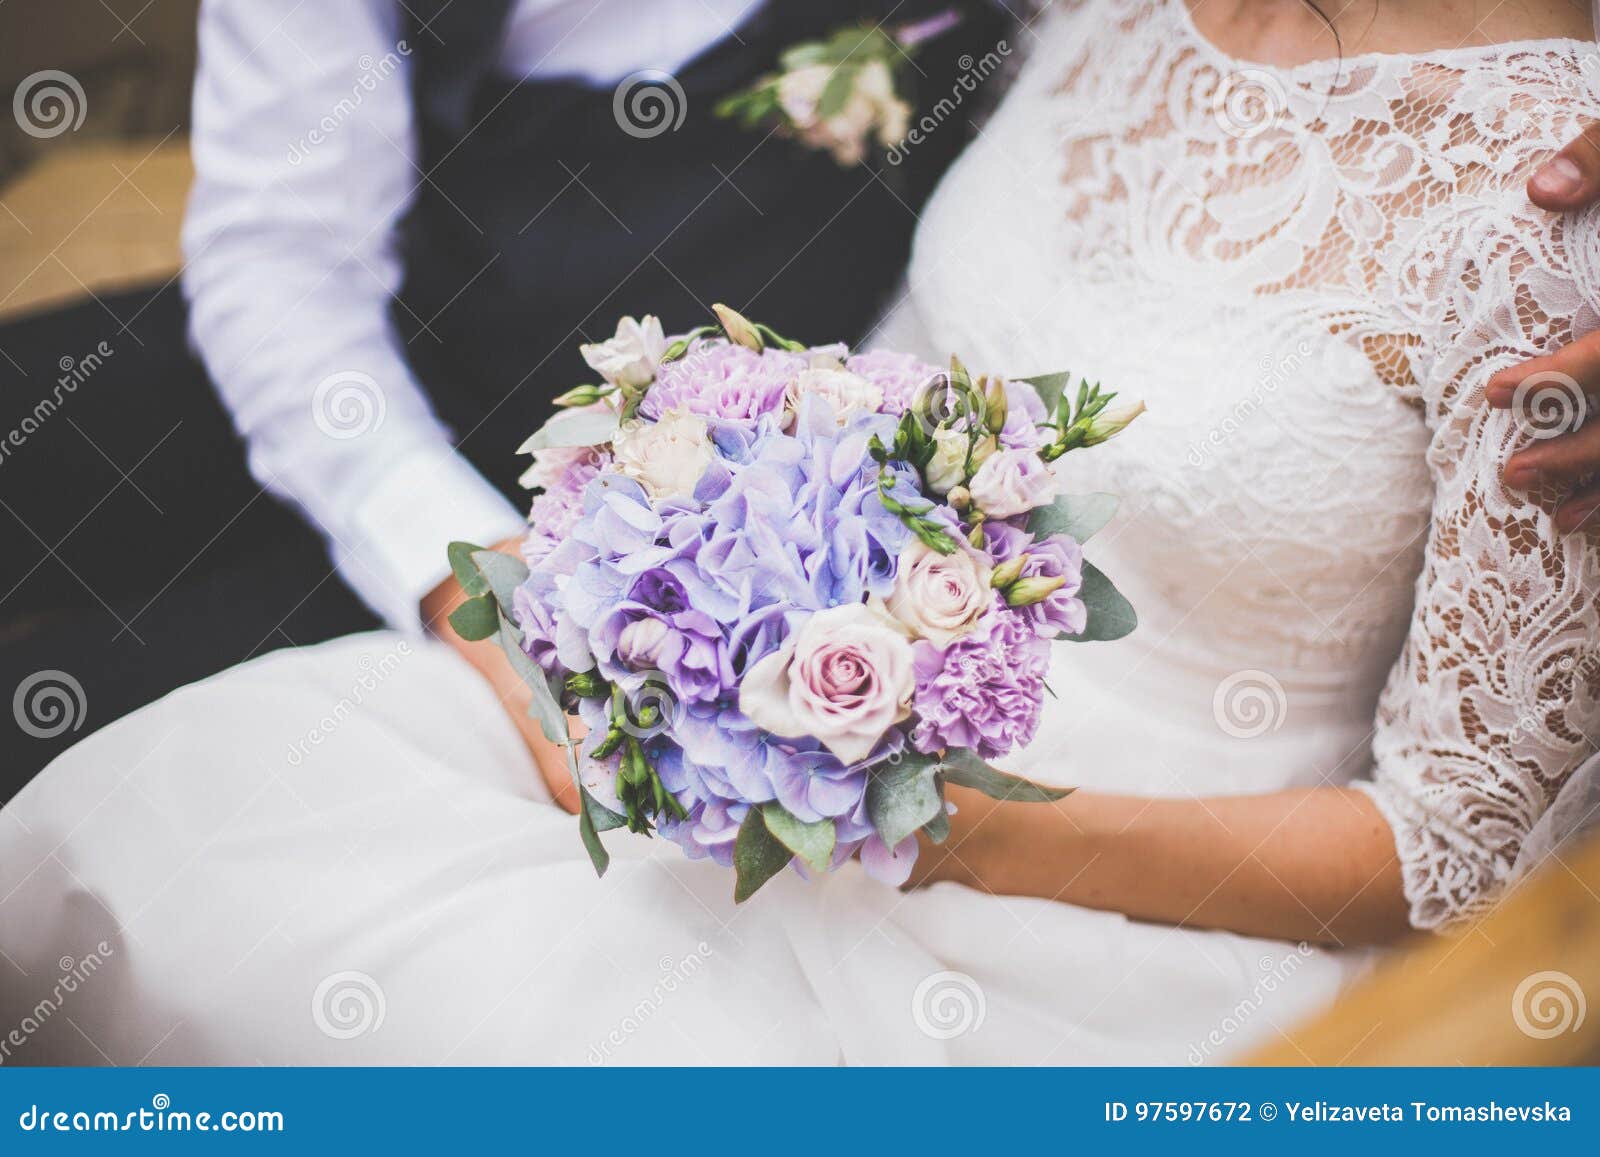 Bride and Groom Holding Bridal Bouquet Stock Photo - Image of floral ...